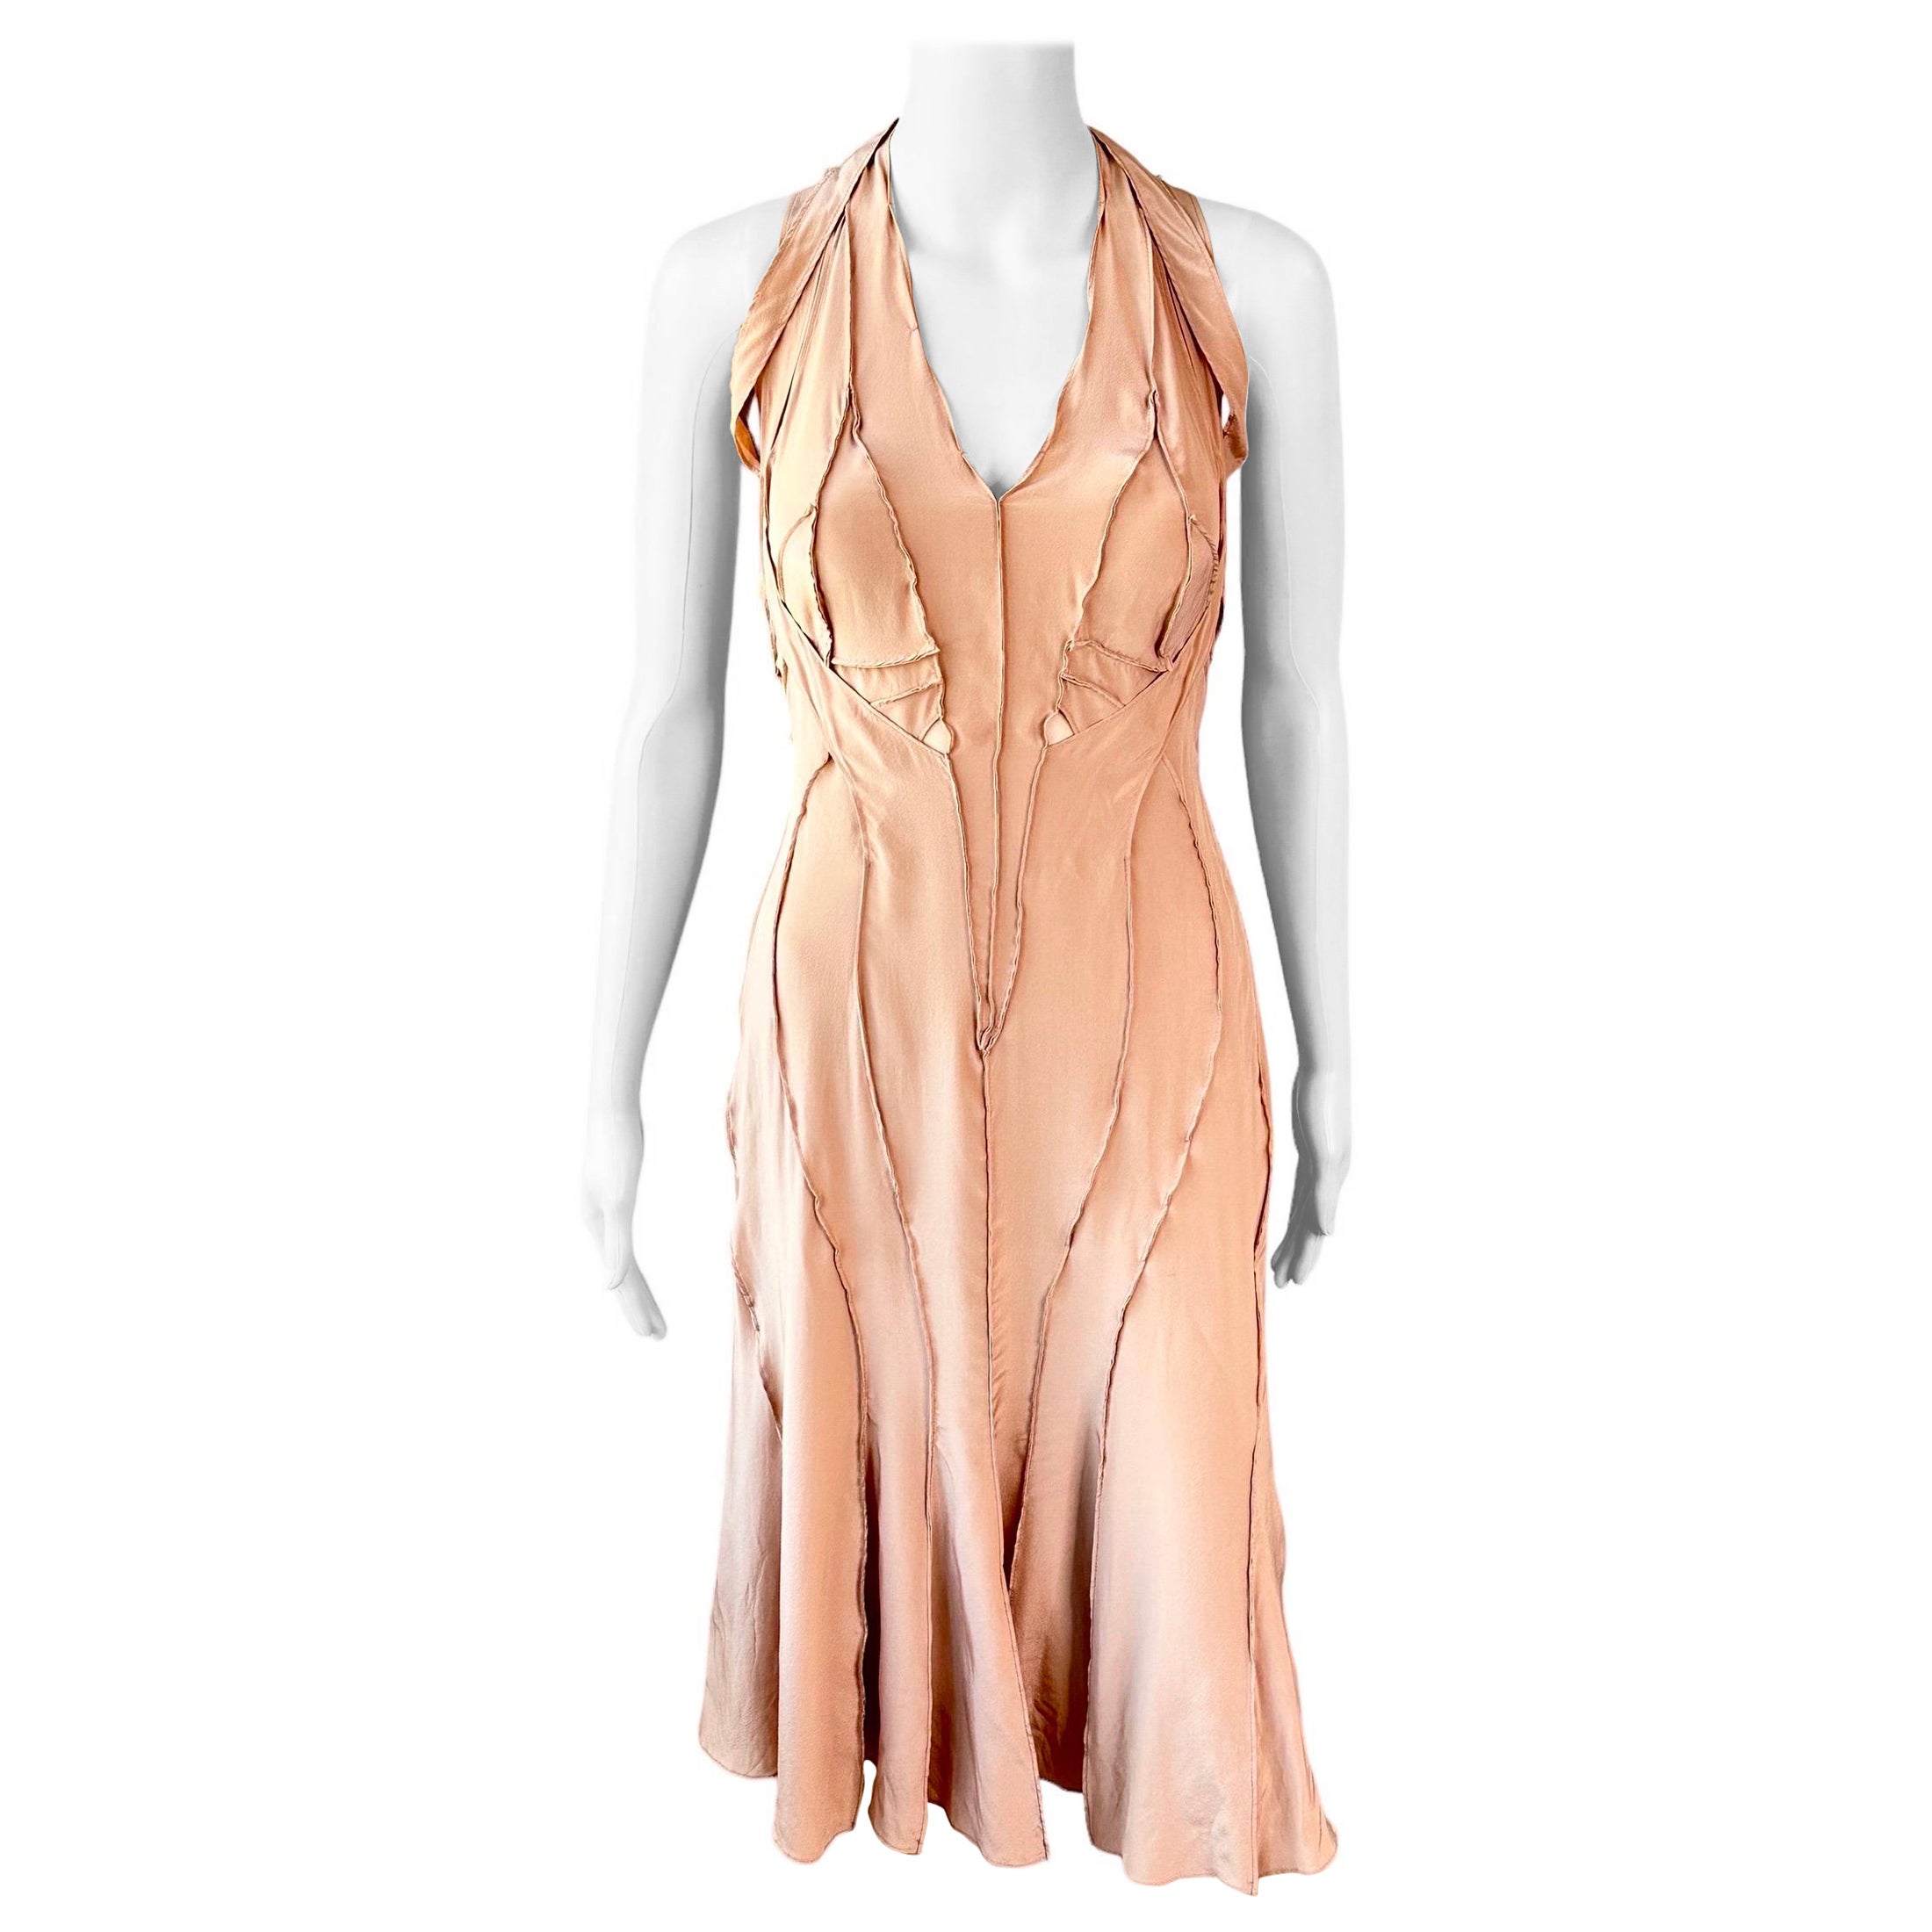 Tom Ford for Yves Saint Laurent YSL S/S 2003 Runway Cutout Silk Dress  For Sale